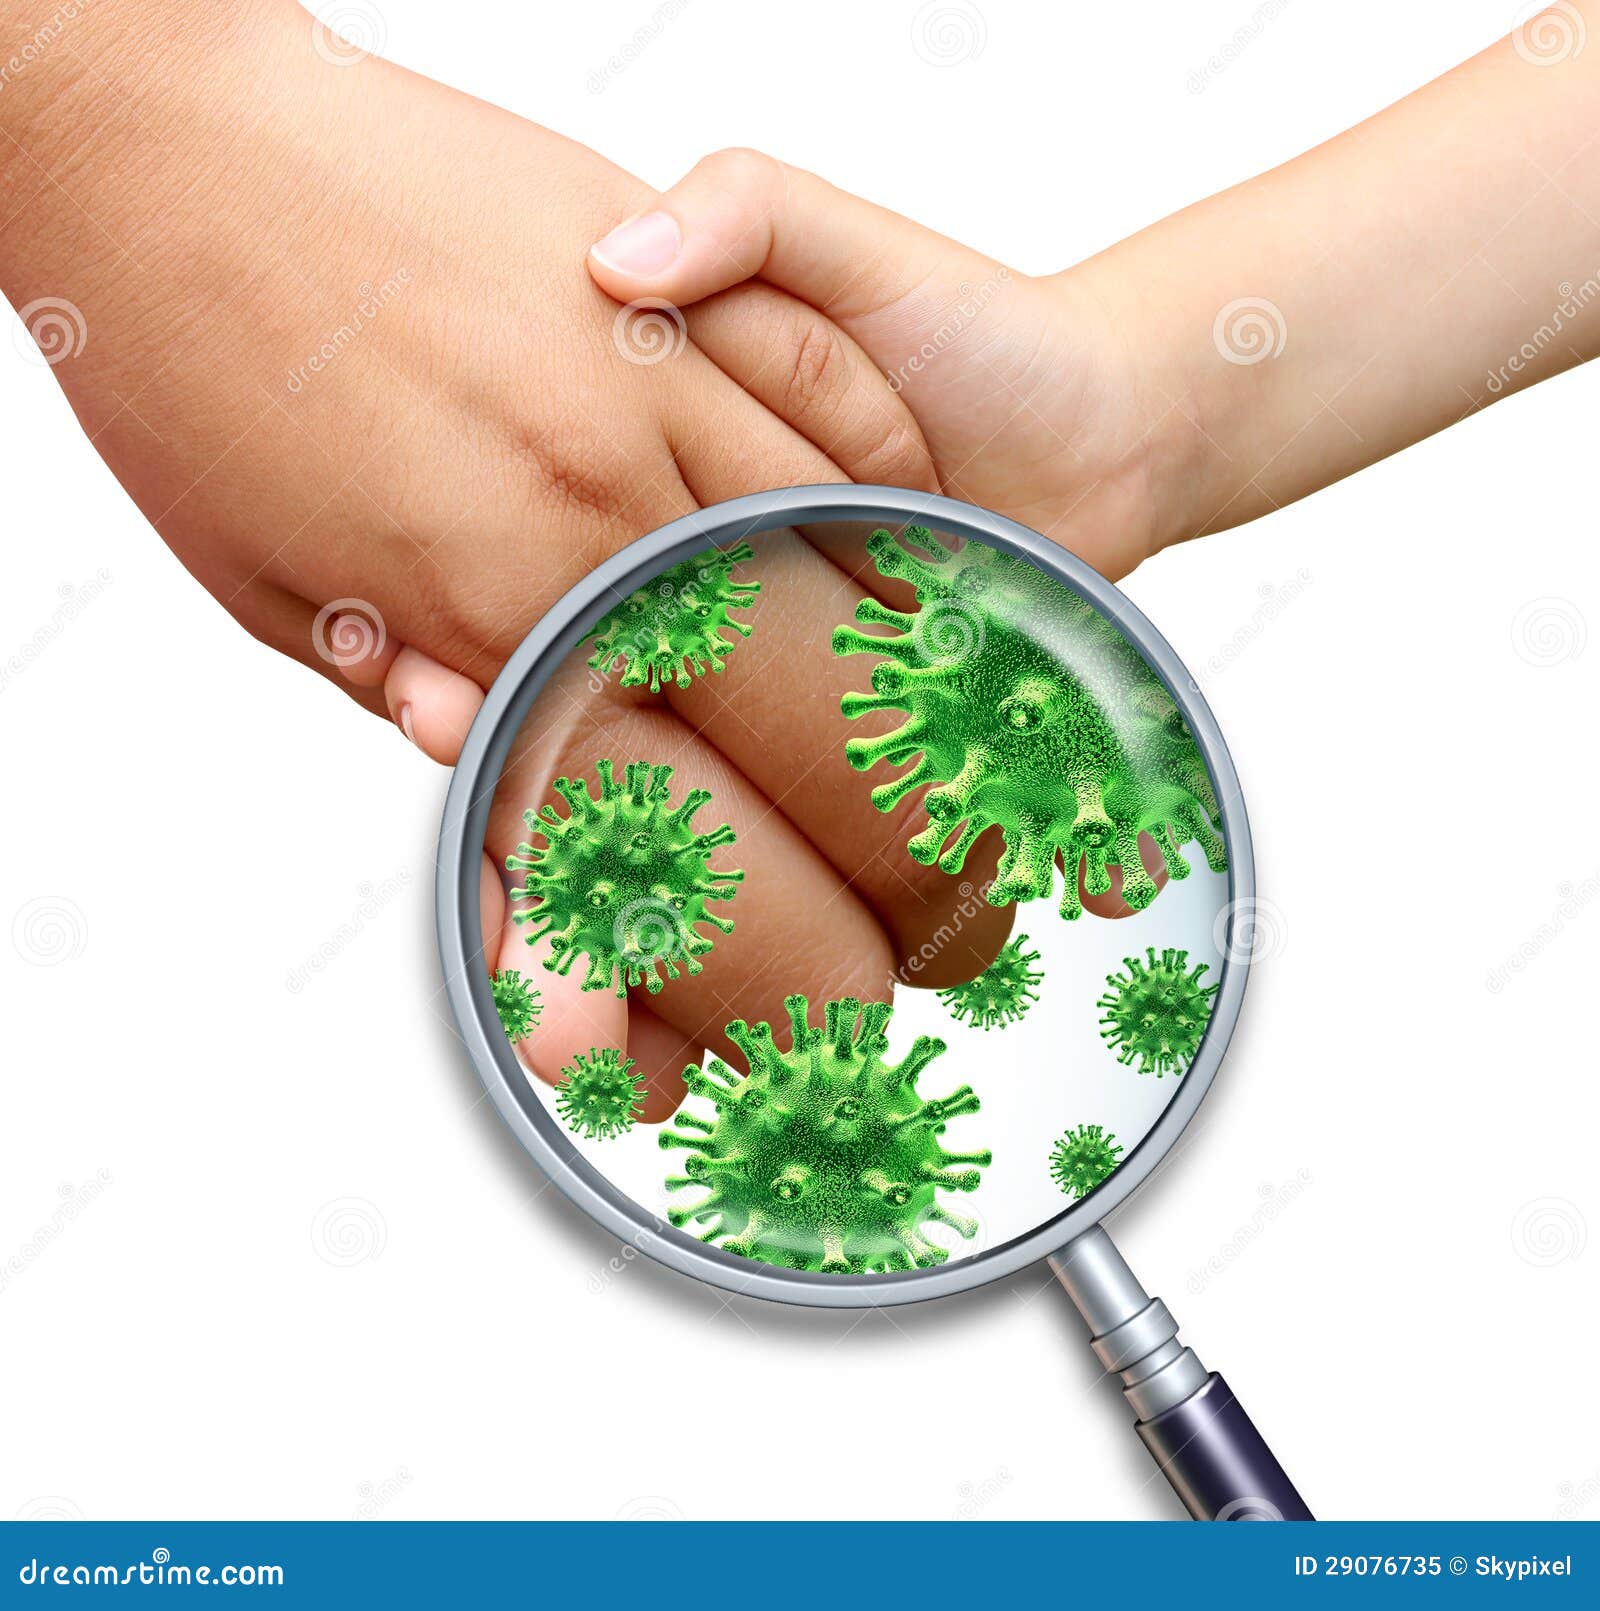 Contagious Infection stock illustration. Illustration of infectious